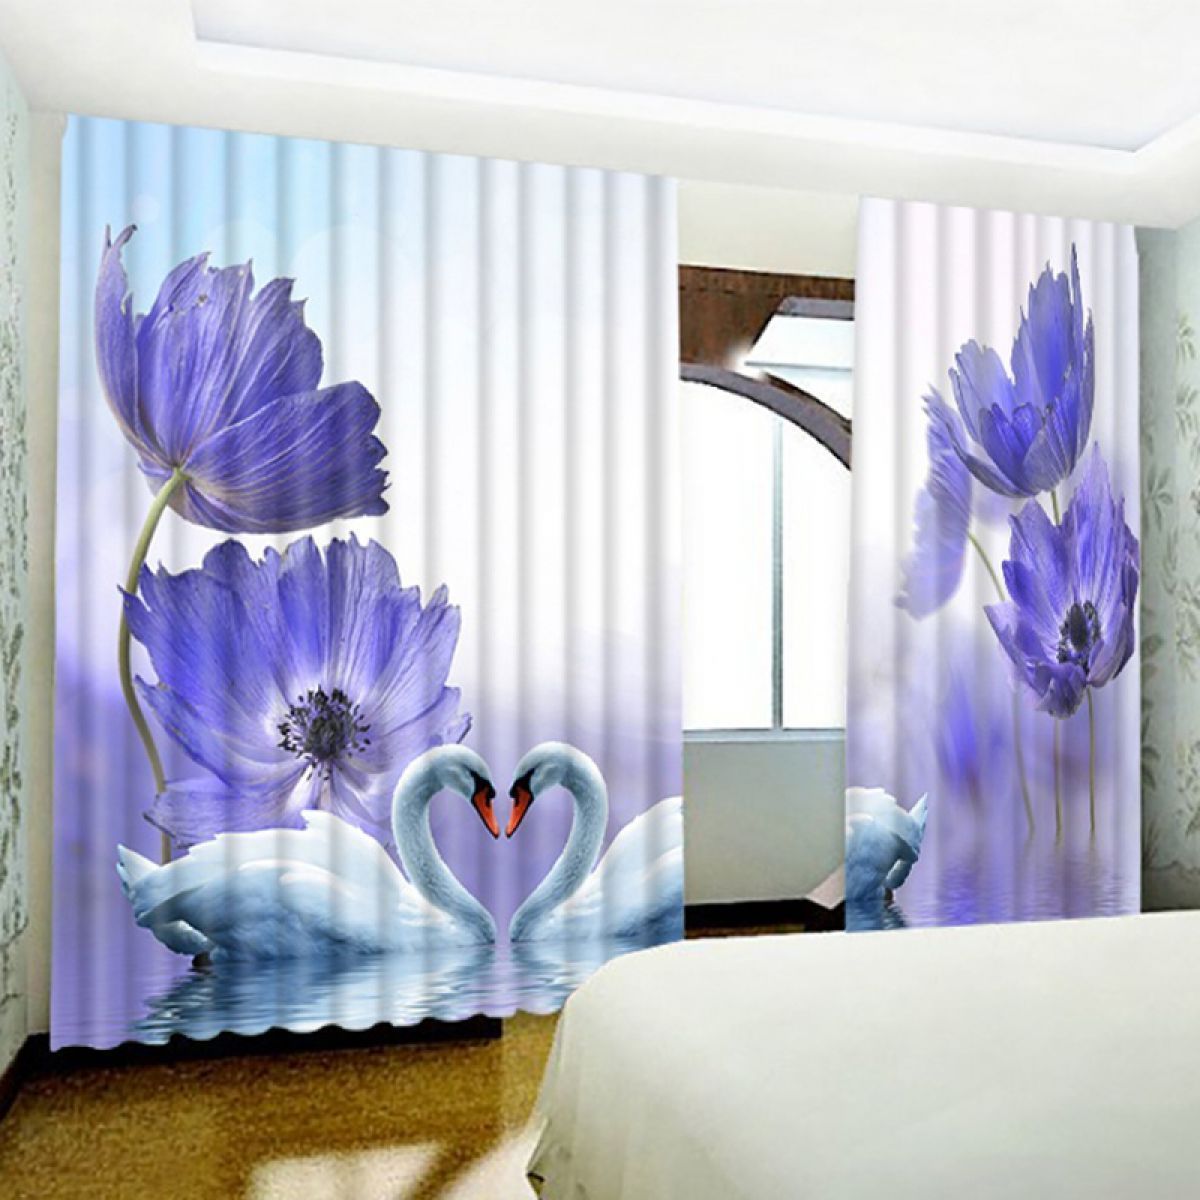 Flowers And Couple Swans Printed Window Curtain Home Decor